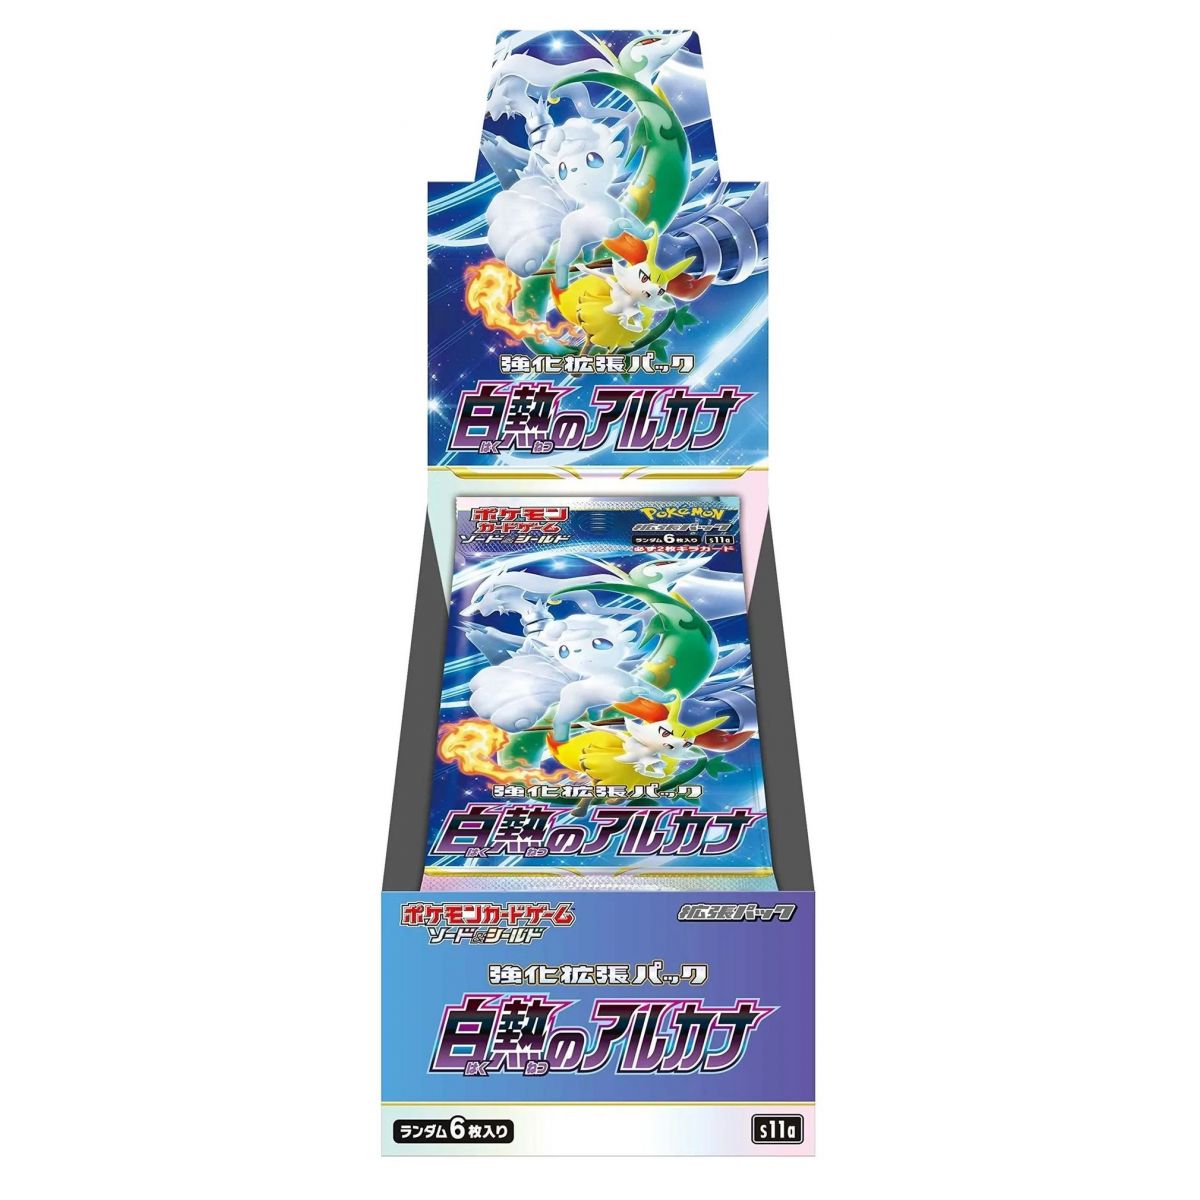 Pokémon - Display - Box of 20 Boosters - Incandescent Arcana [S11a] - JP